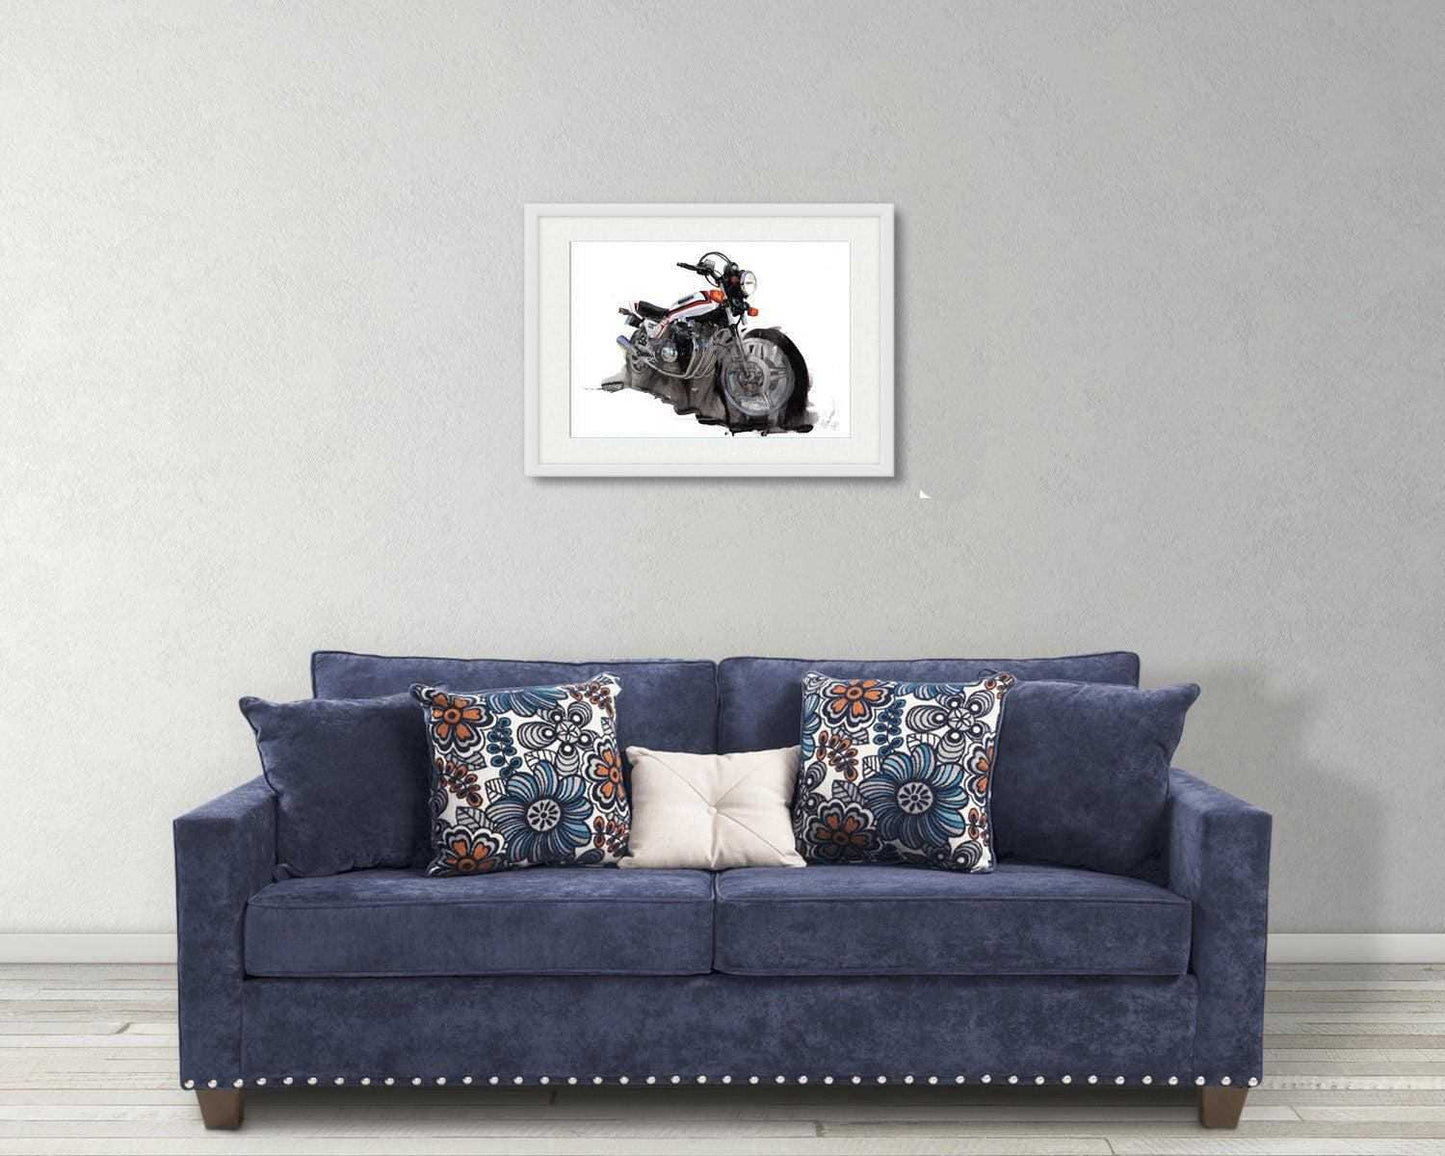 Painting of a Honda CB900f Classic Motorcycle Limited Print Motorcycle Bike ArtbyMyleslaurence